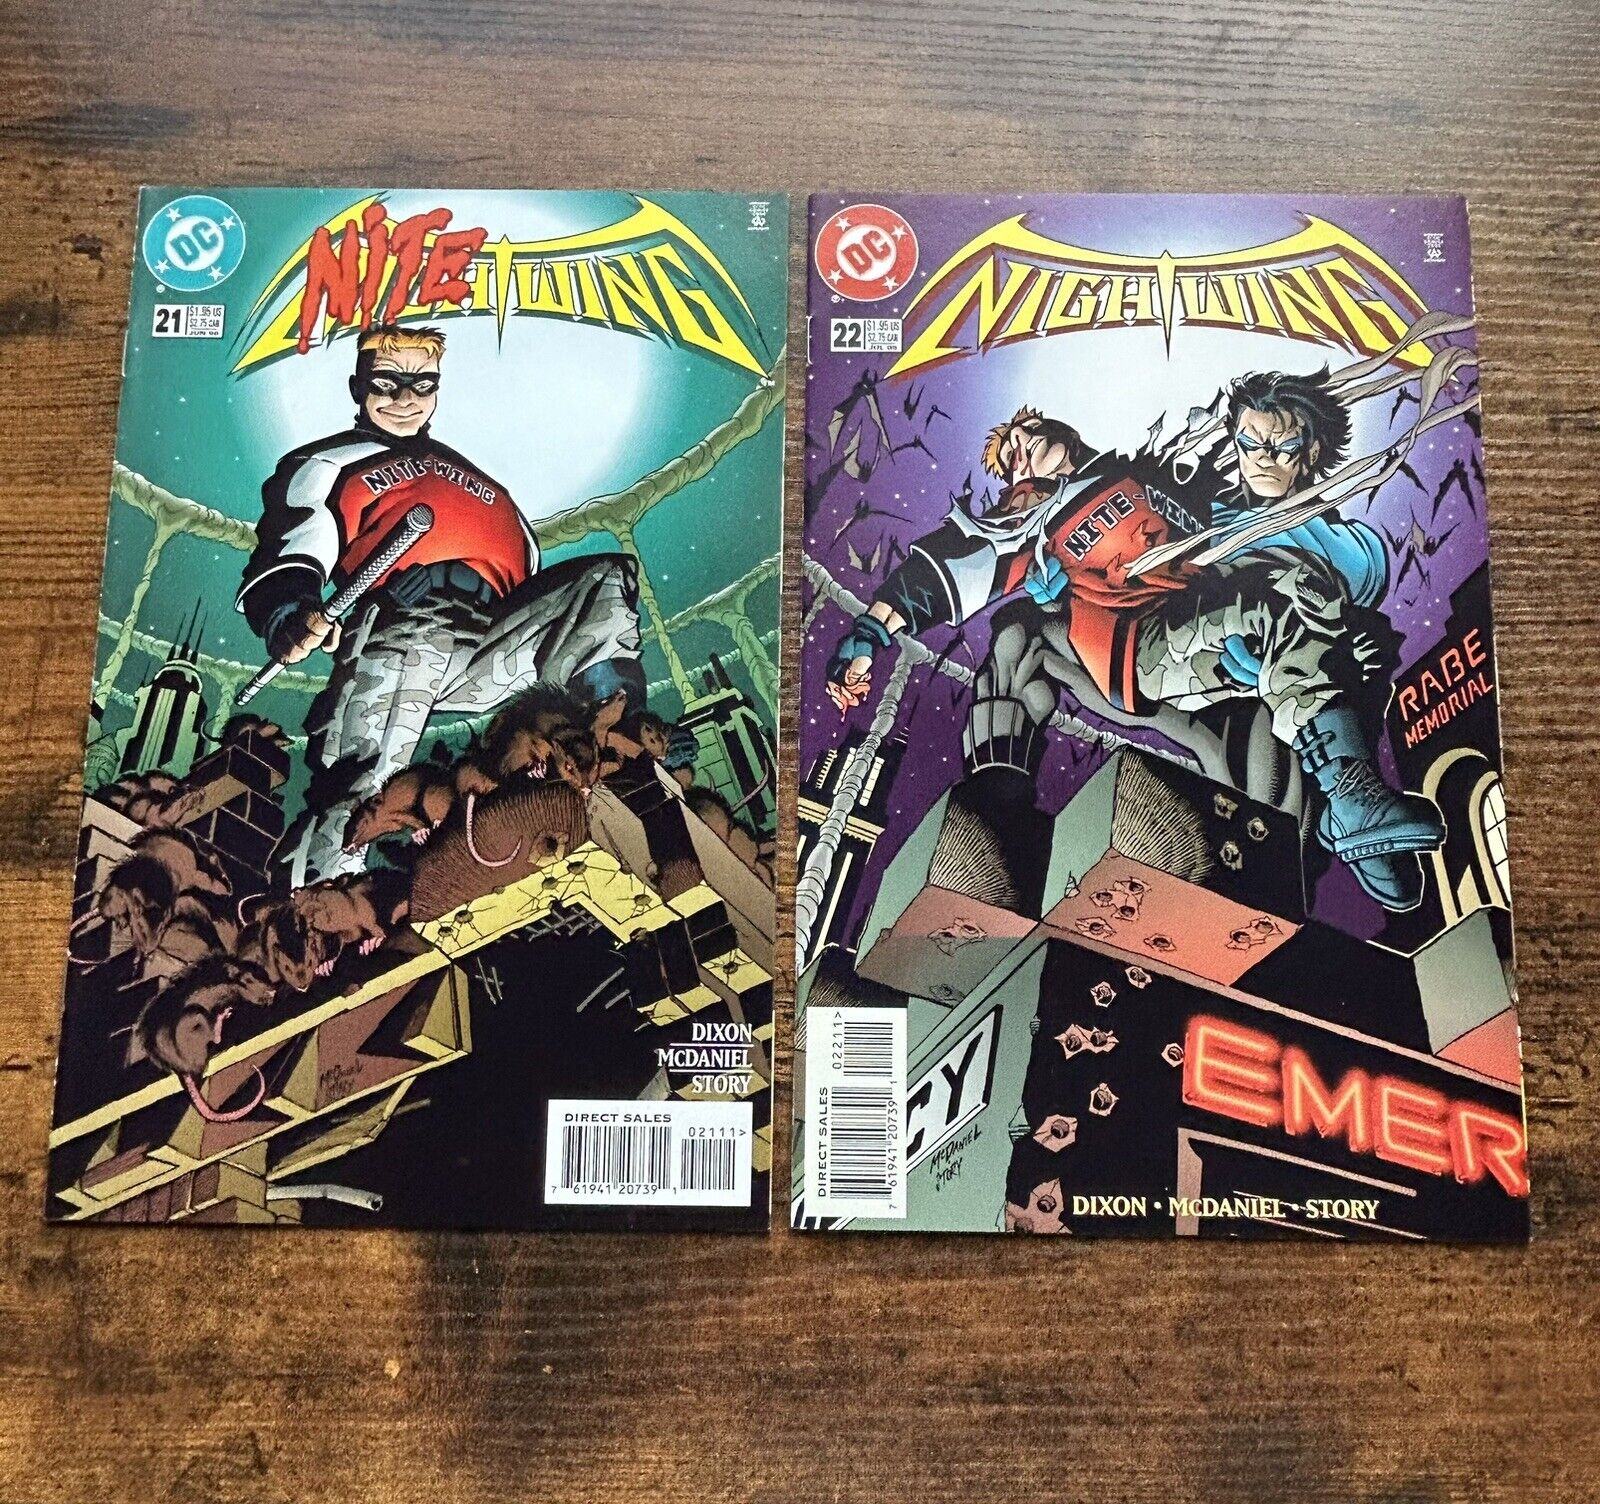 Nightwing (1996) DC - Lot Issues #21, 22, 23, 24, 25